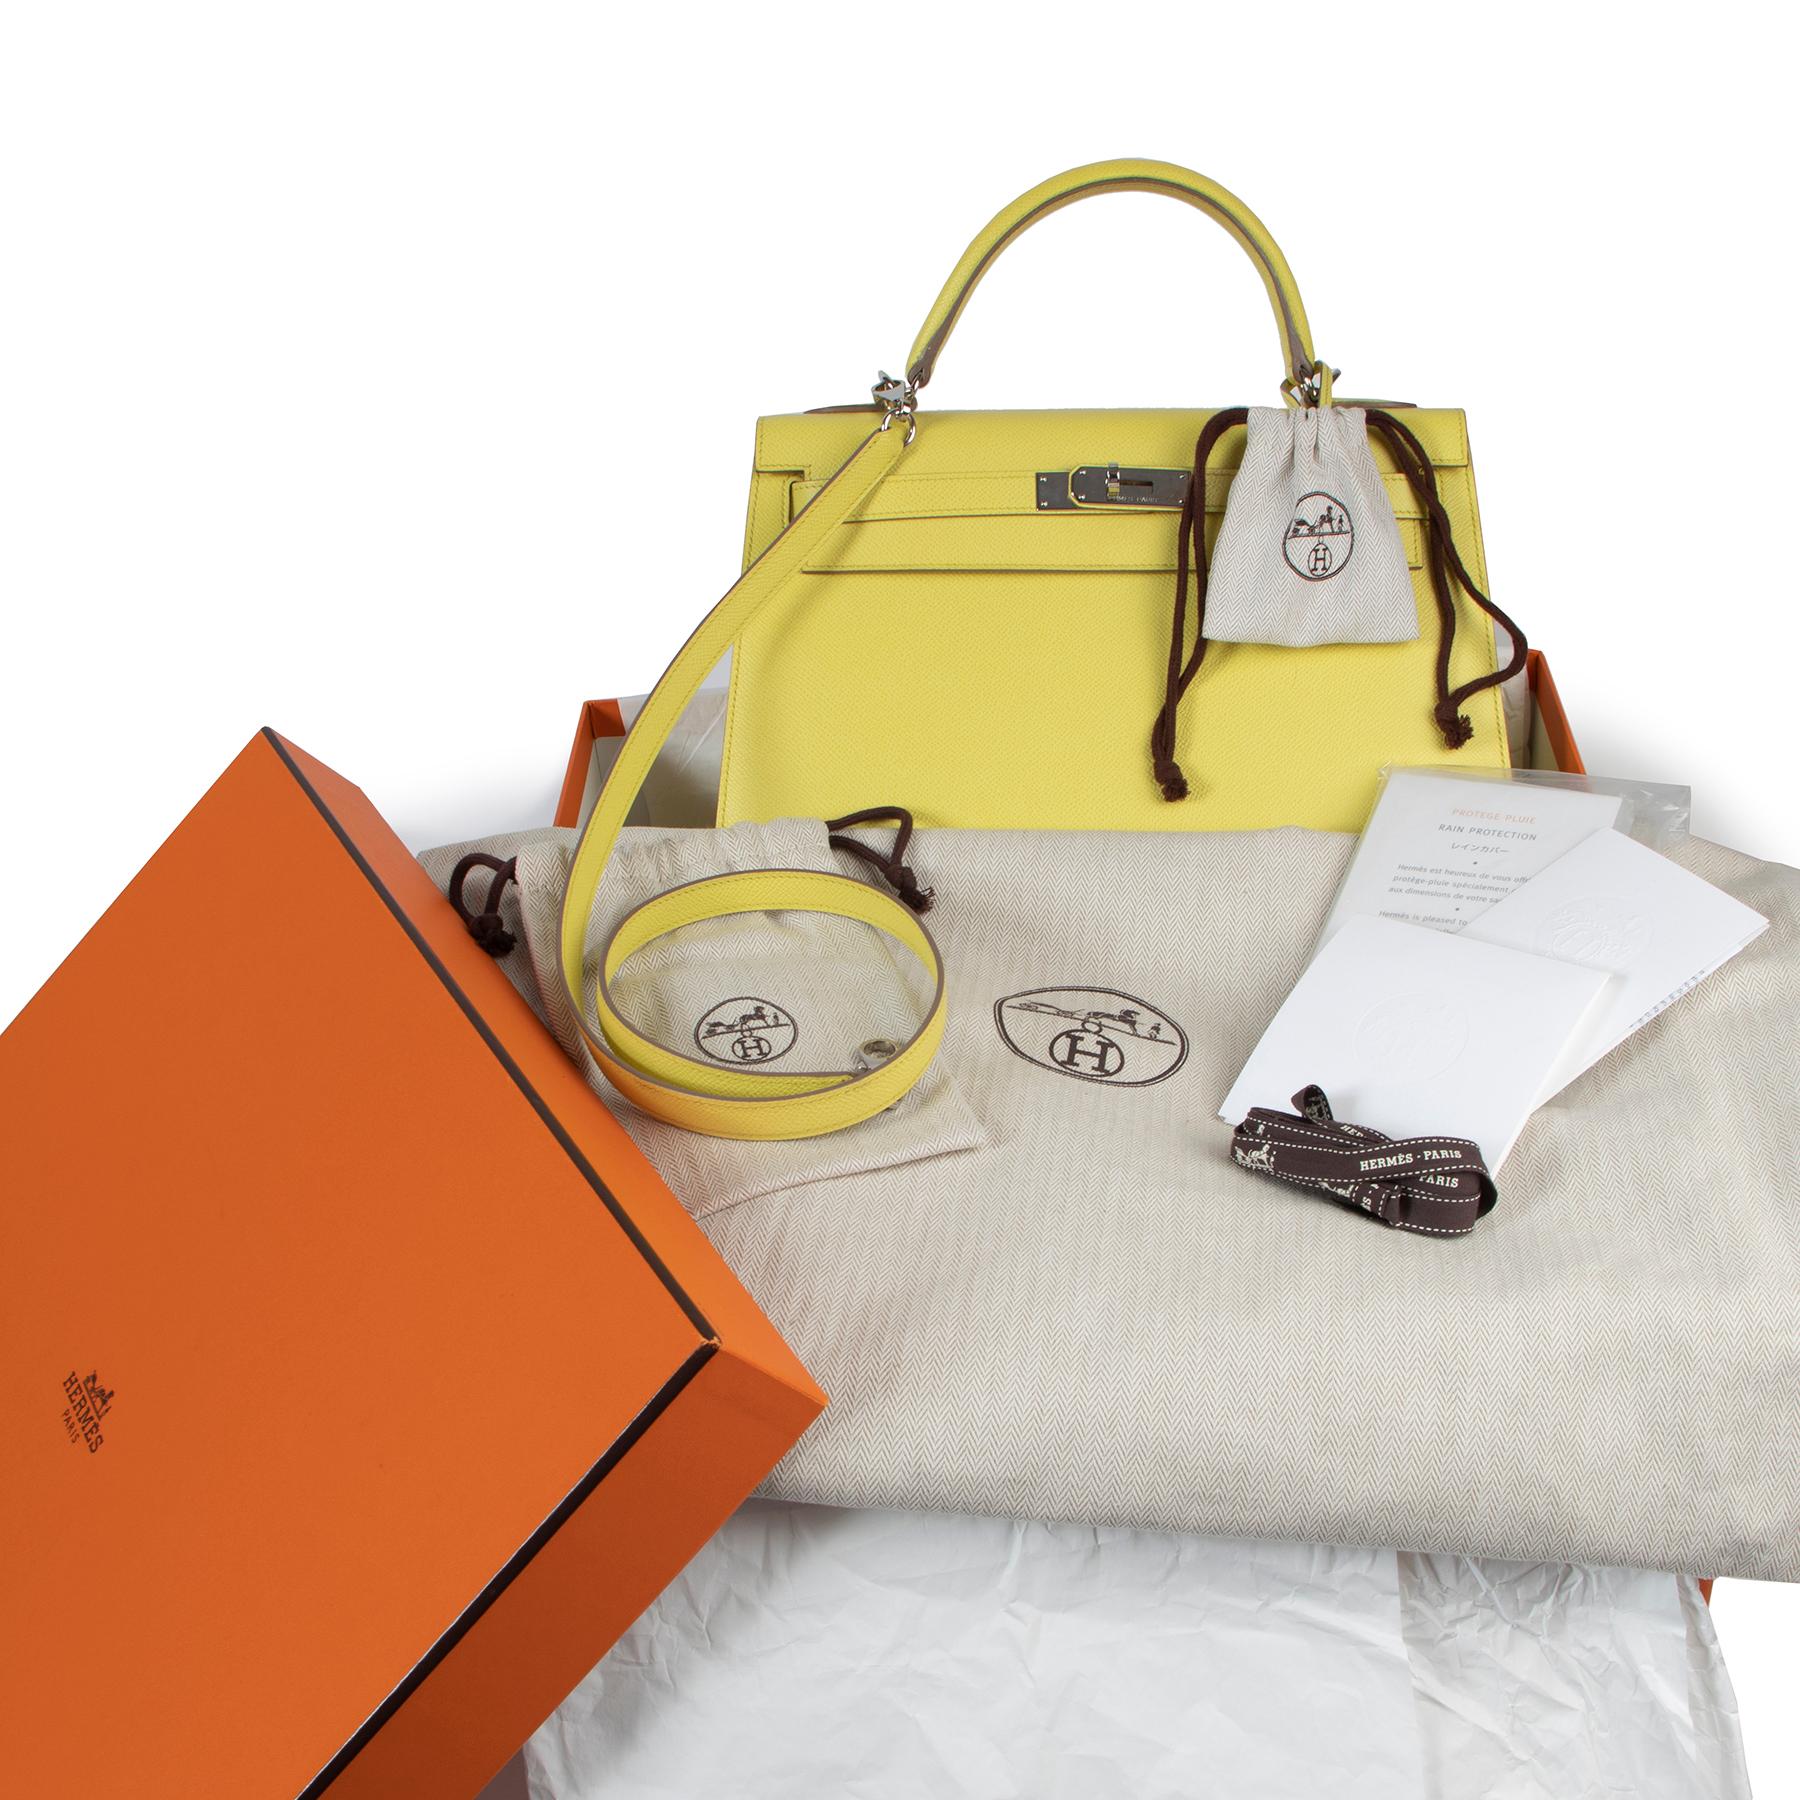 Hermès Kelly 32 Epsom Soufre PHW

You will have several heads turning when your promenade along the street with this bag. The iconic Kelly bag designed by Hermès in a vibrant color.

This beauty is crafted in epsom leather. This type of leather is